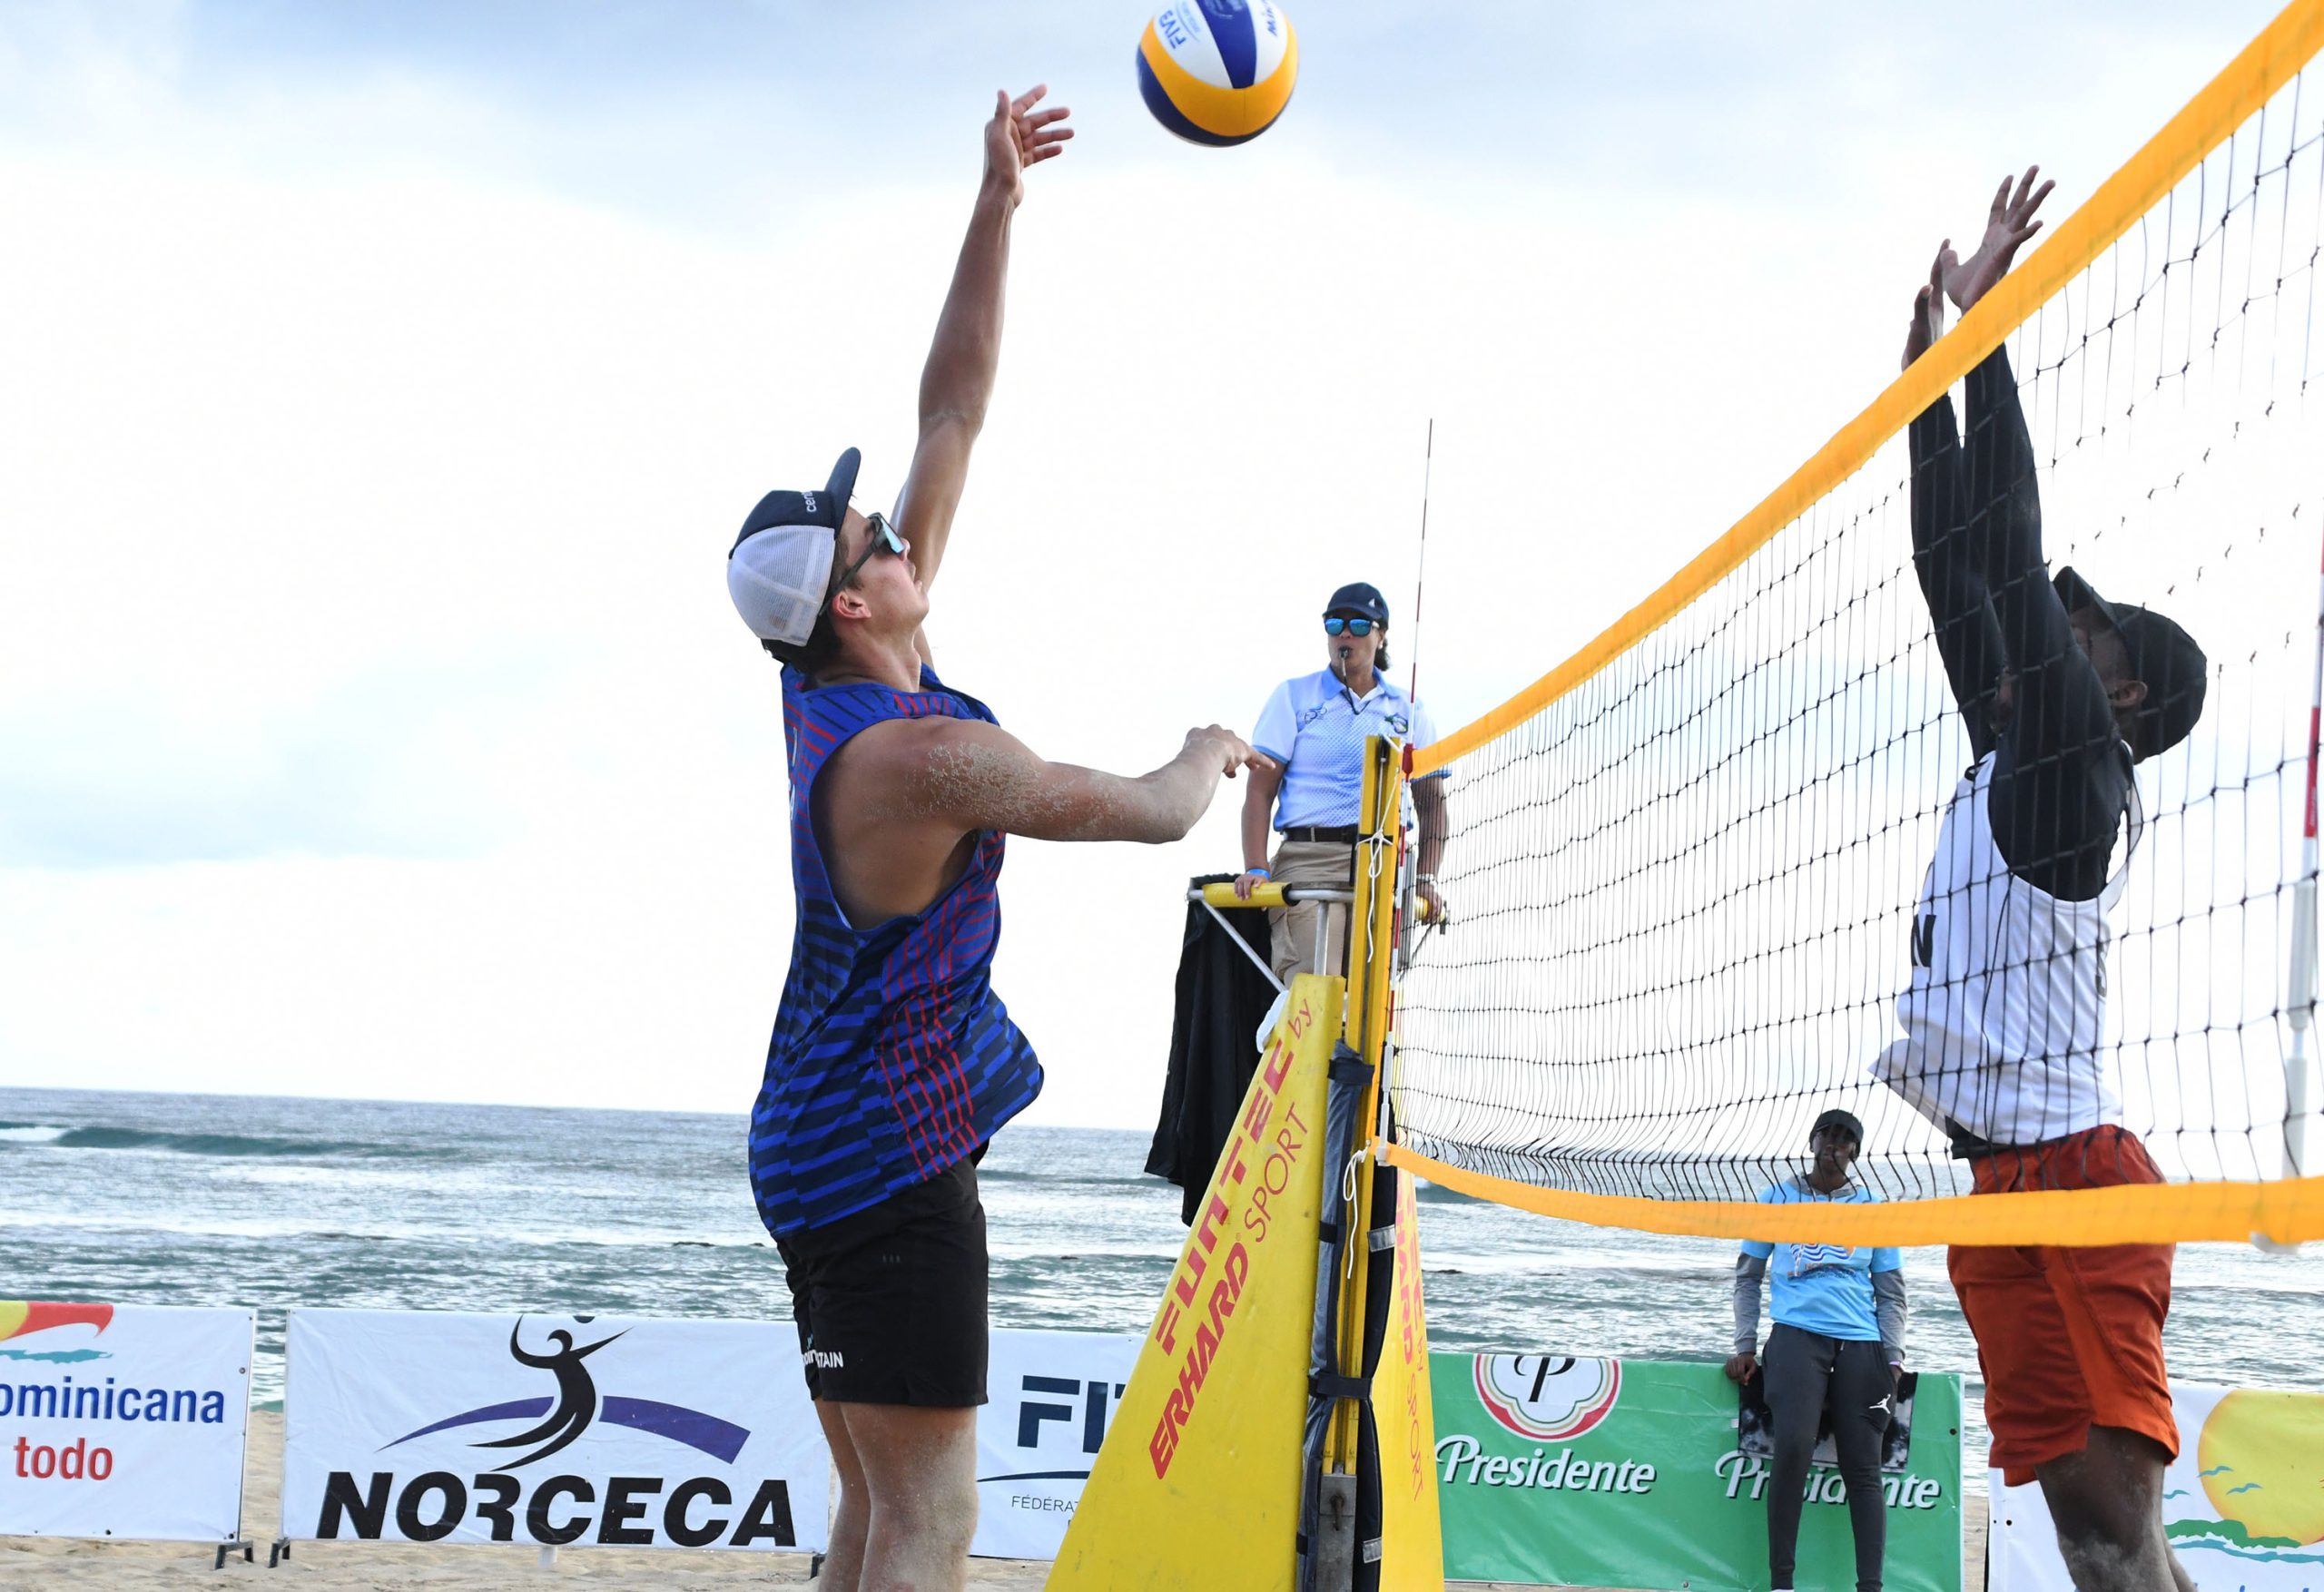 Canada, Cuba, USA and Dominicans start strong at NORCECA Beach Finals